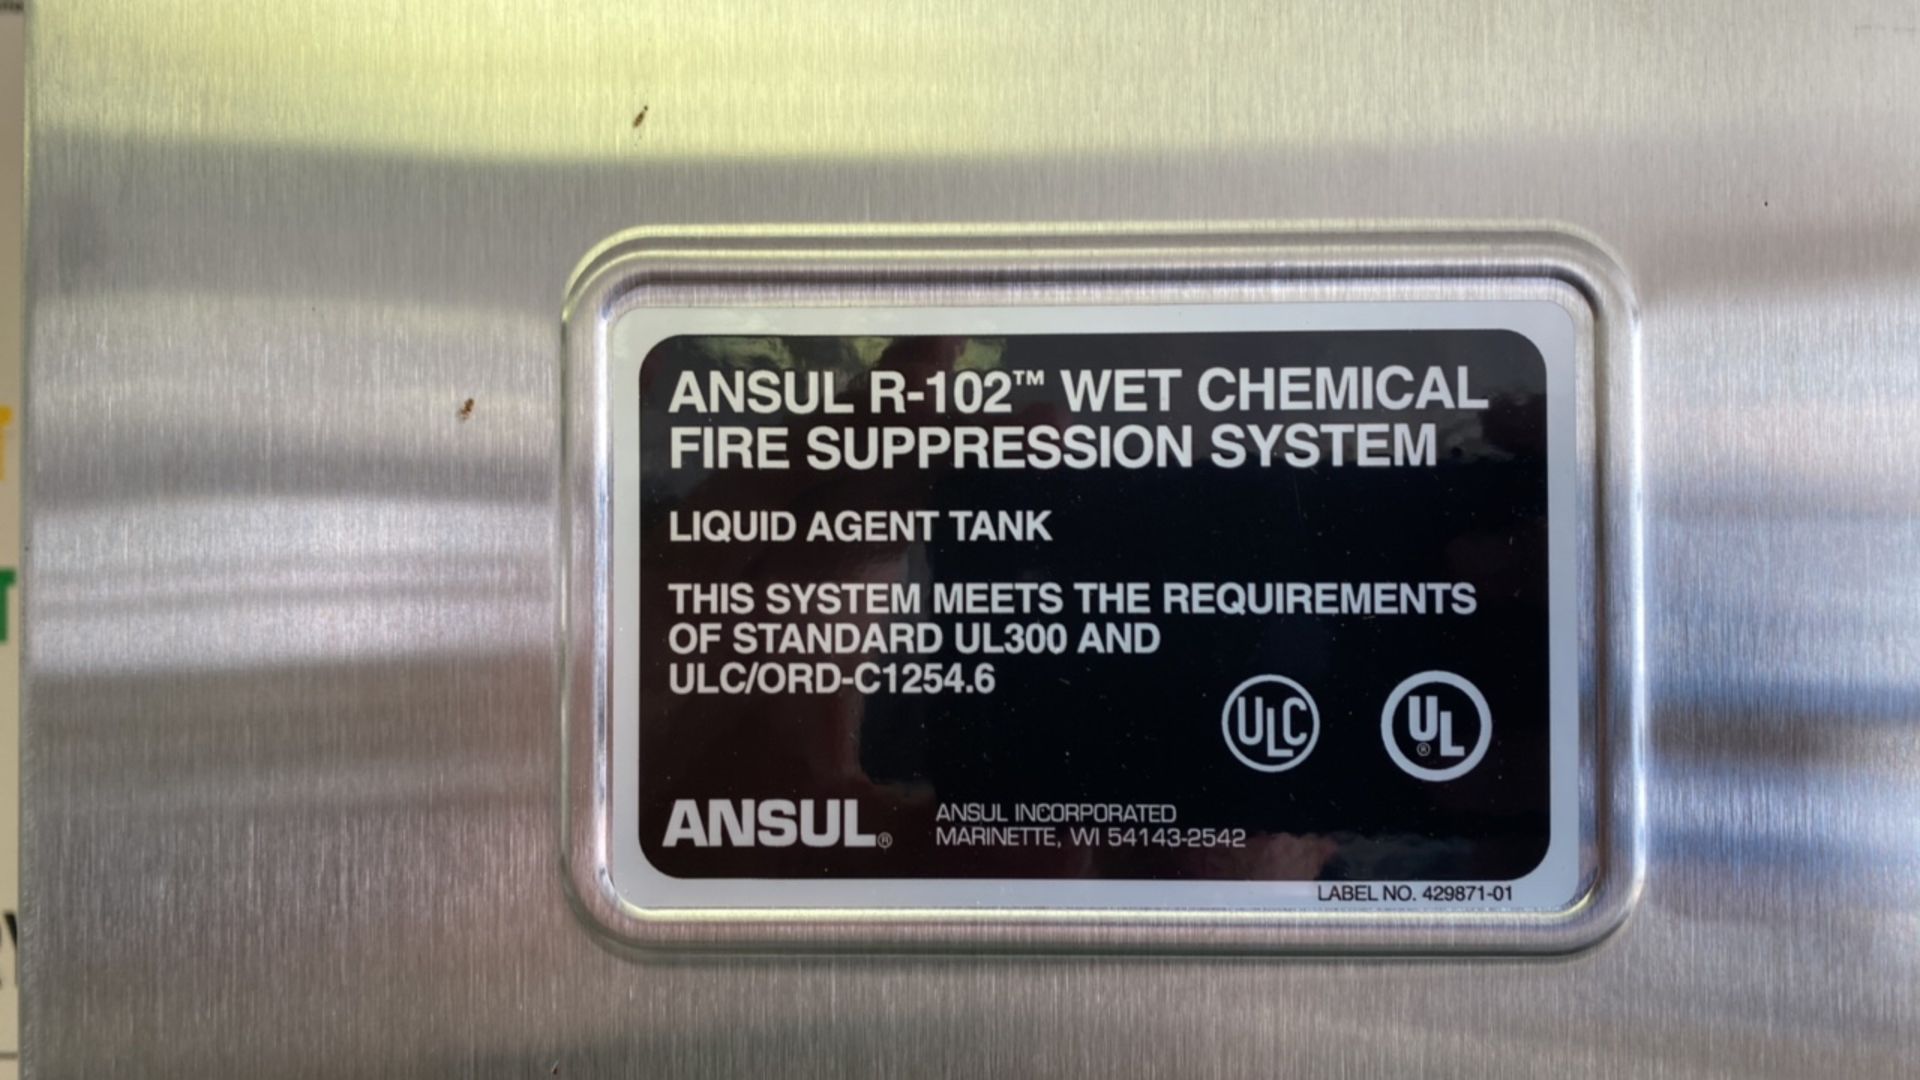 Ansul Fire Suppression System - Image 3 of 6